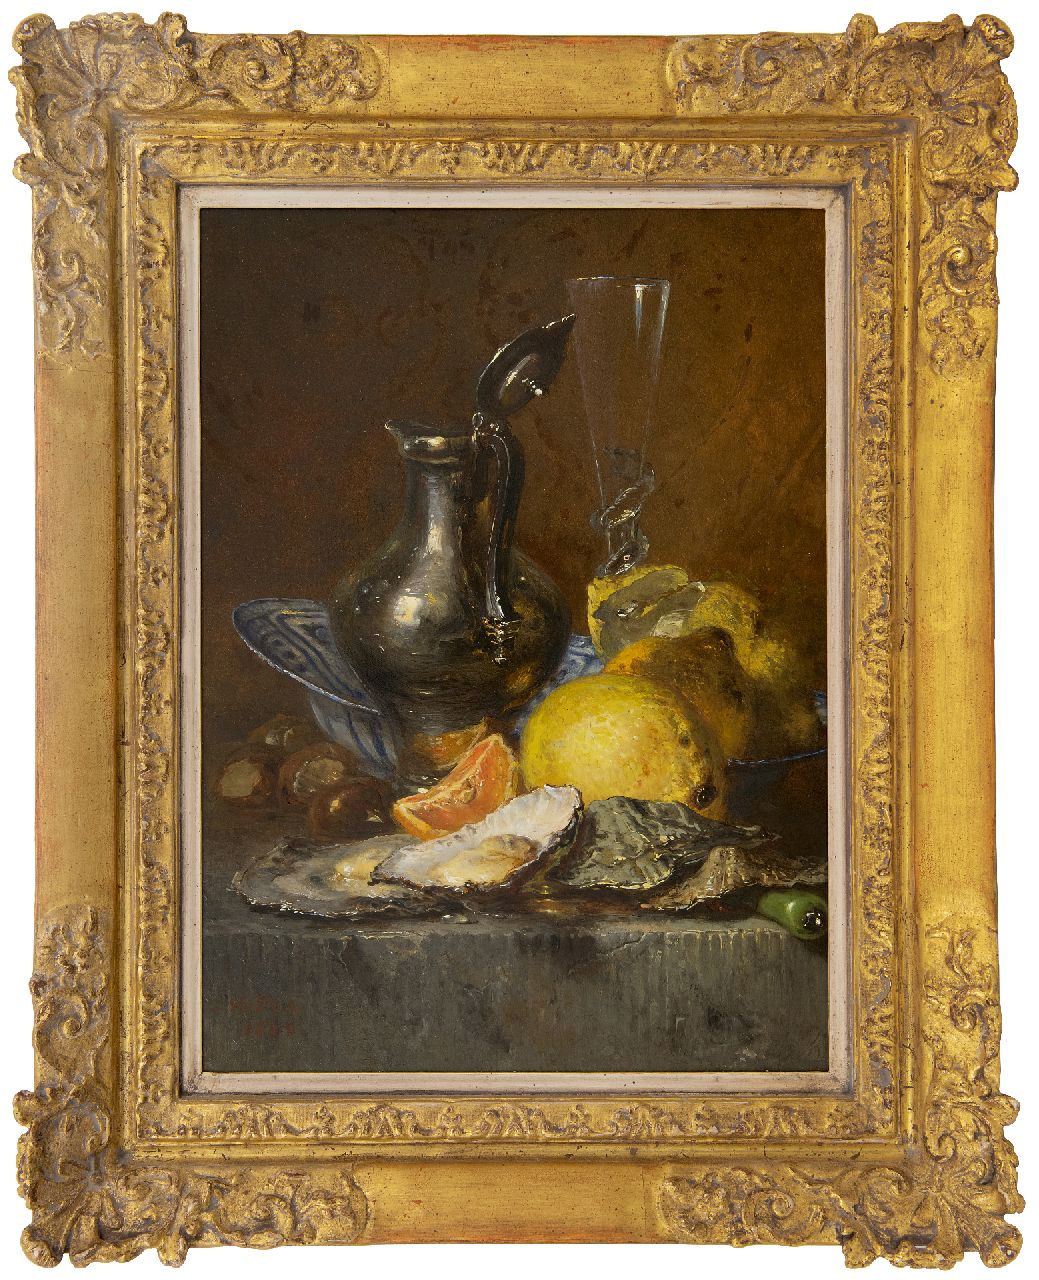 Vos M.  | Maria Vos | Paintings offered for sale | Still life with oysters, lemons and silver jug, oil on panel 38.6 x 27.6 cm, signed l.b. and dated 1880